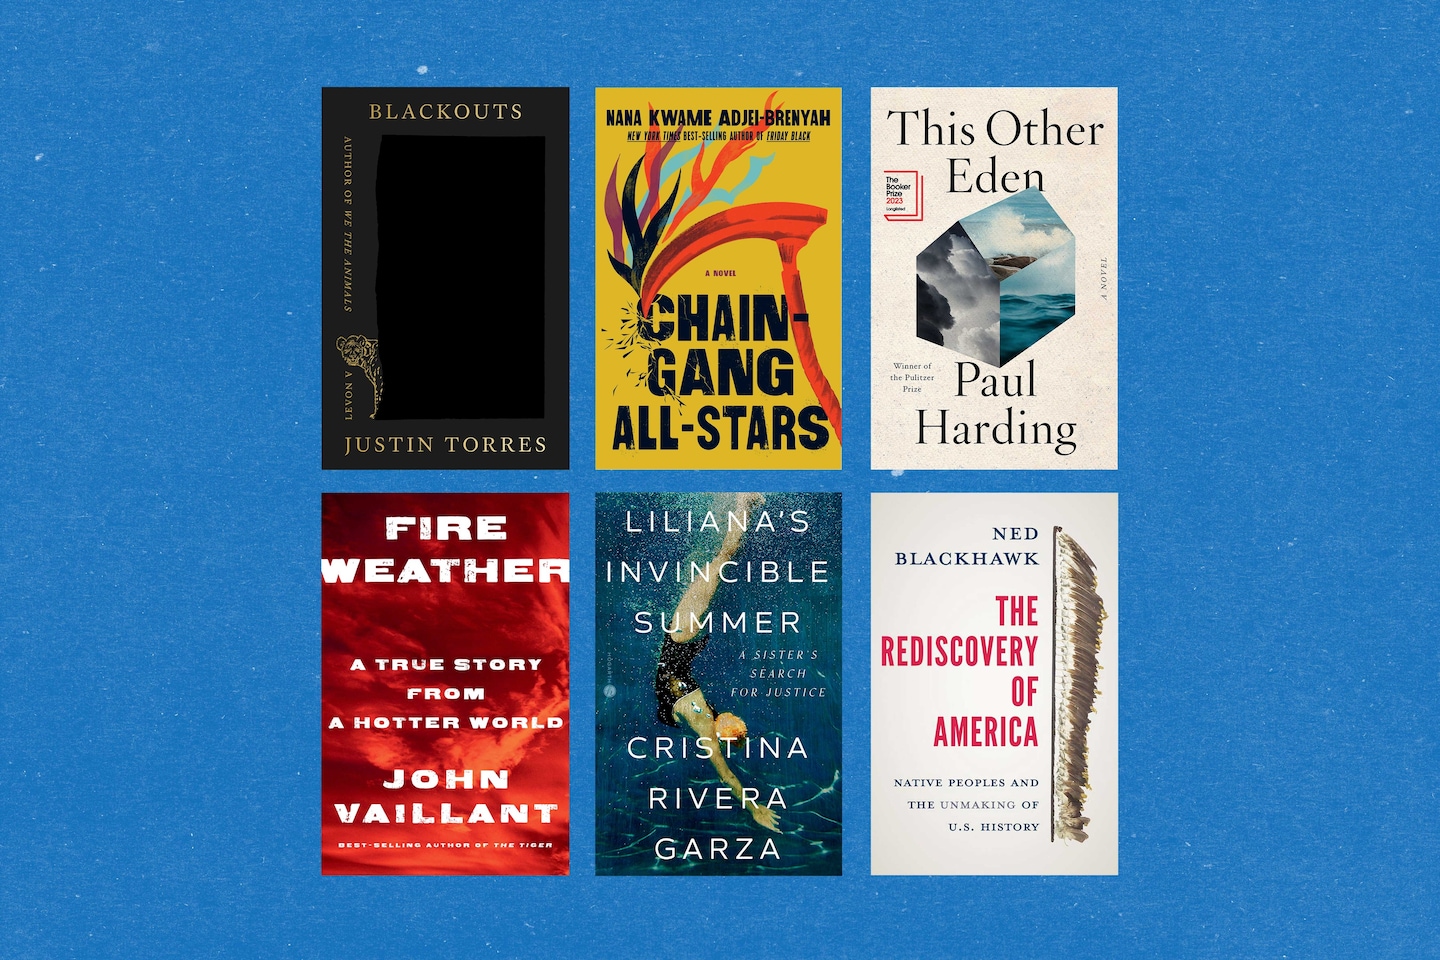 Here are the finalists for the 2023 National Book Awards